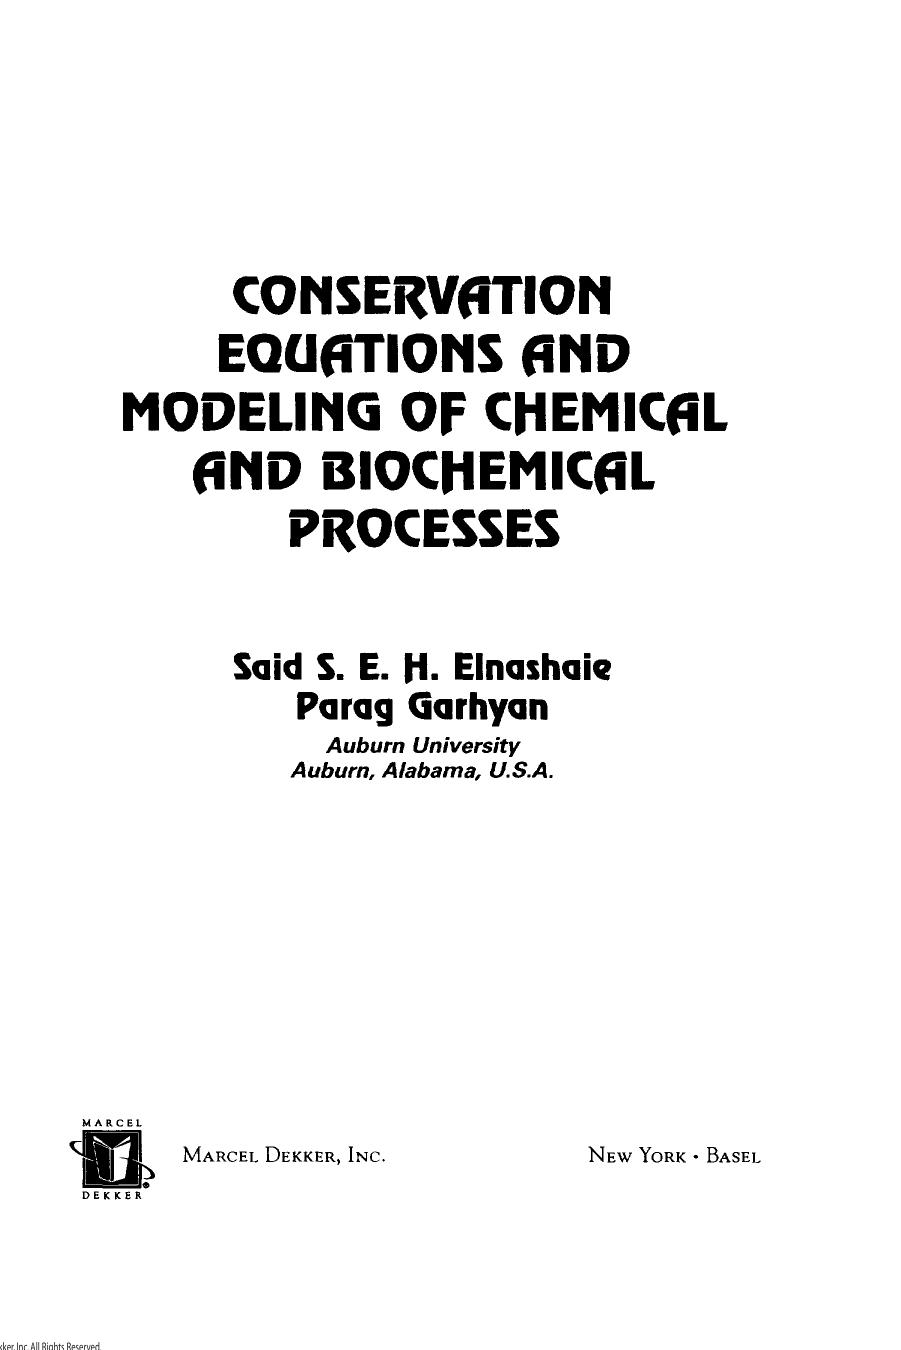 Conservation Equations and Modeling of Chemical and Biochemical Processes